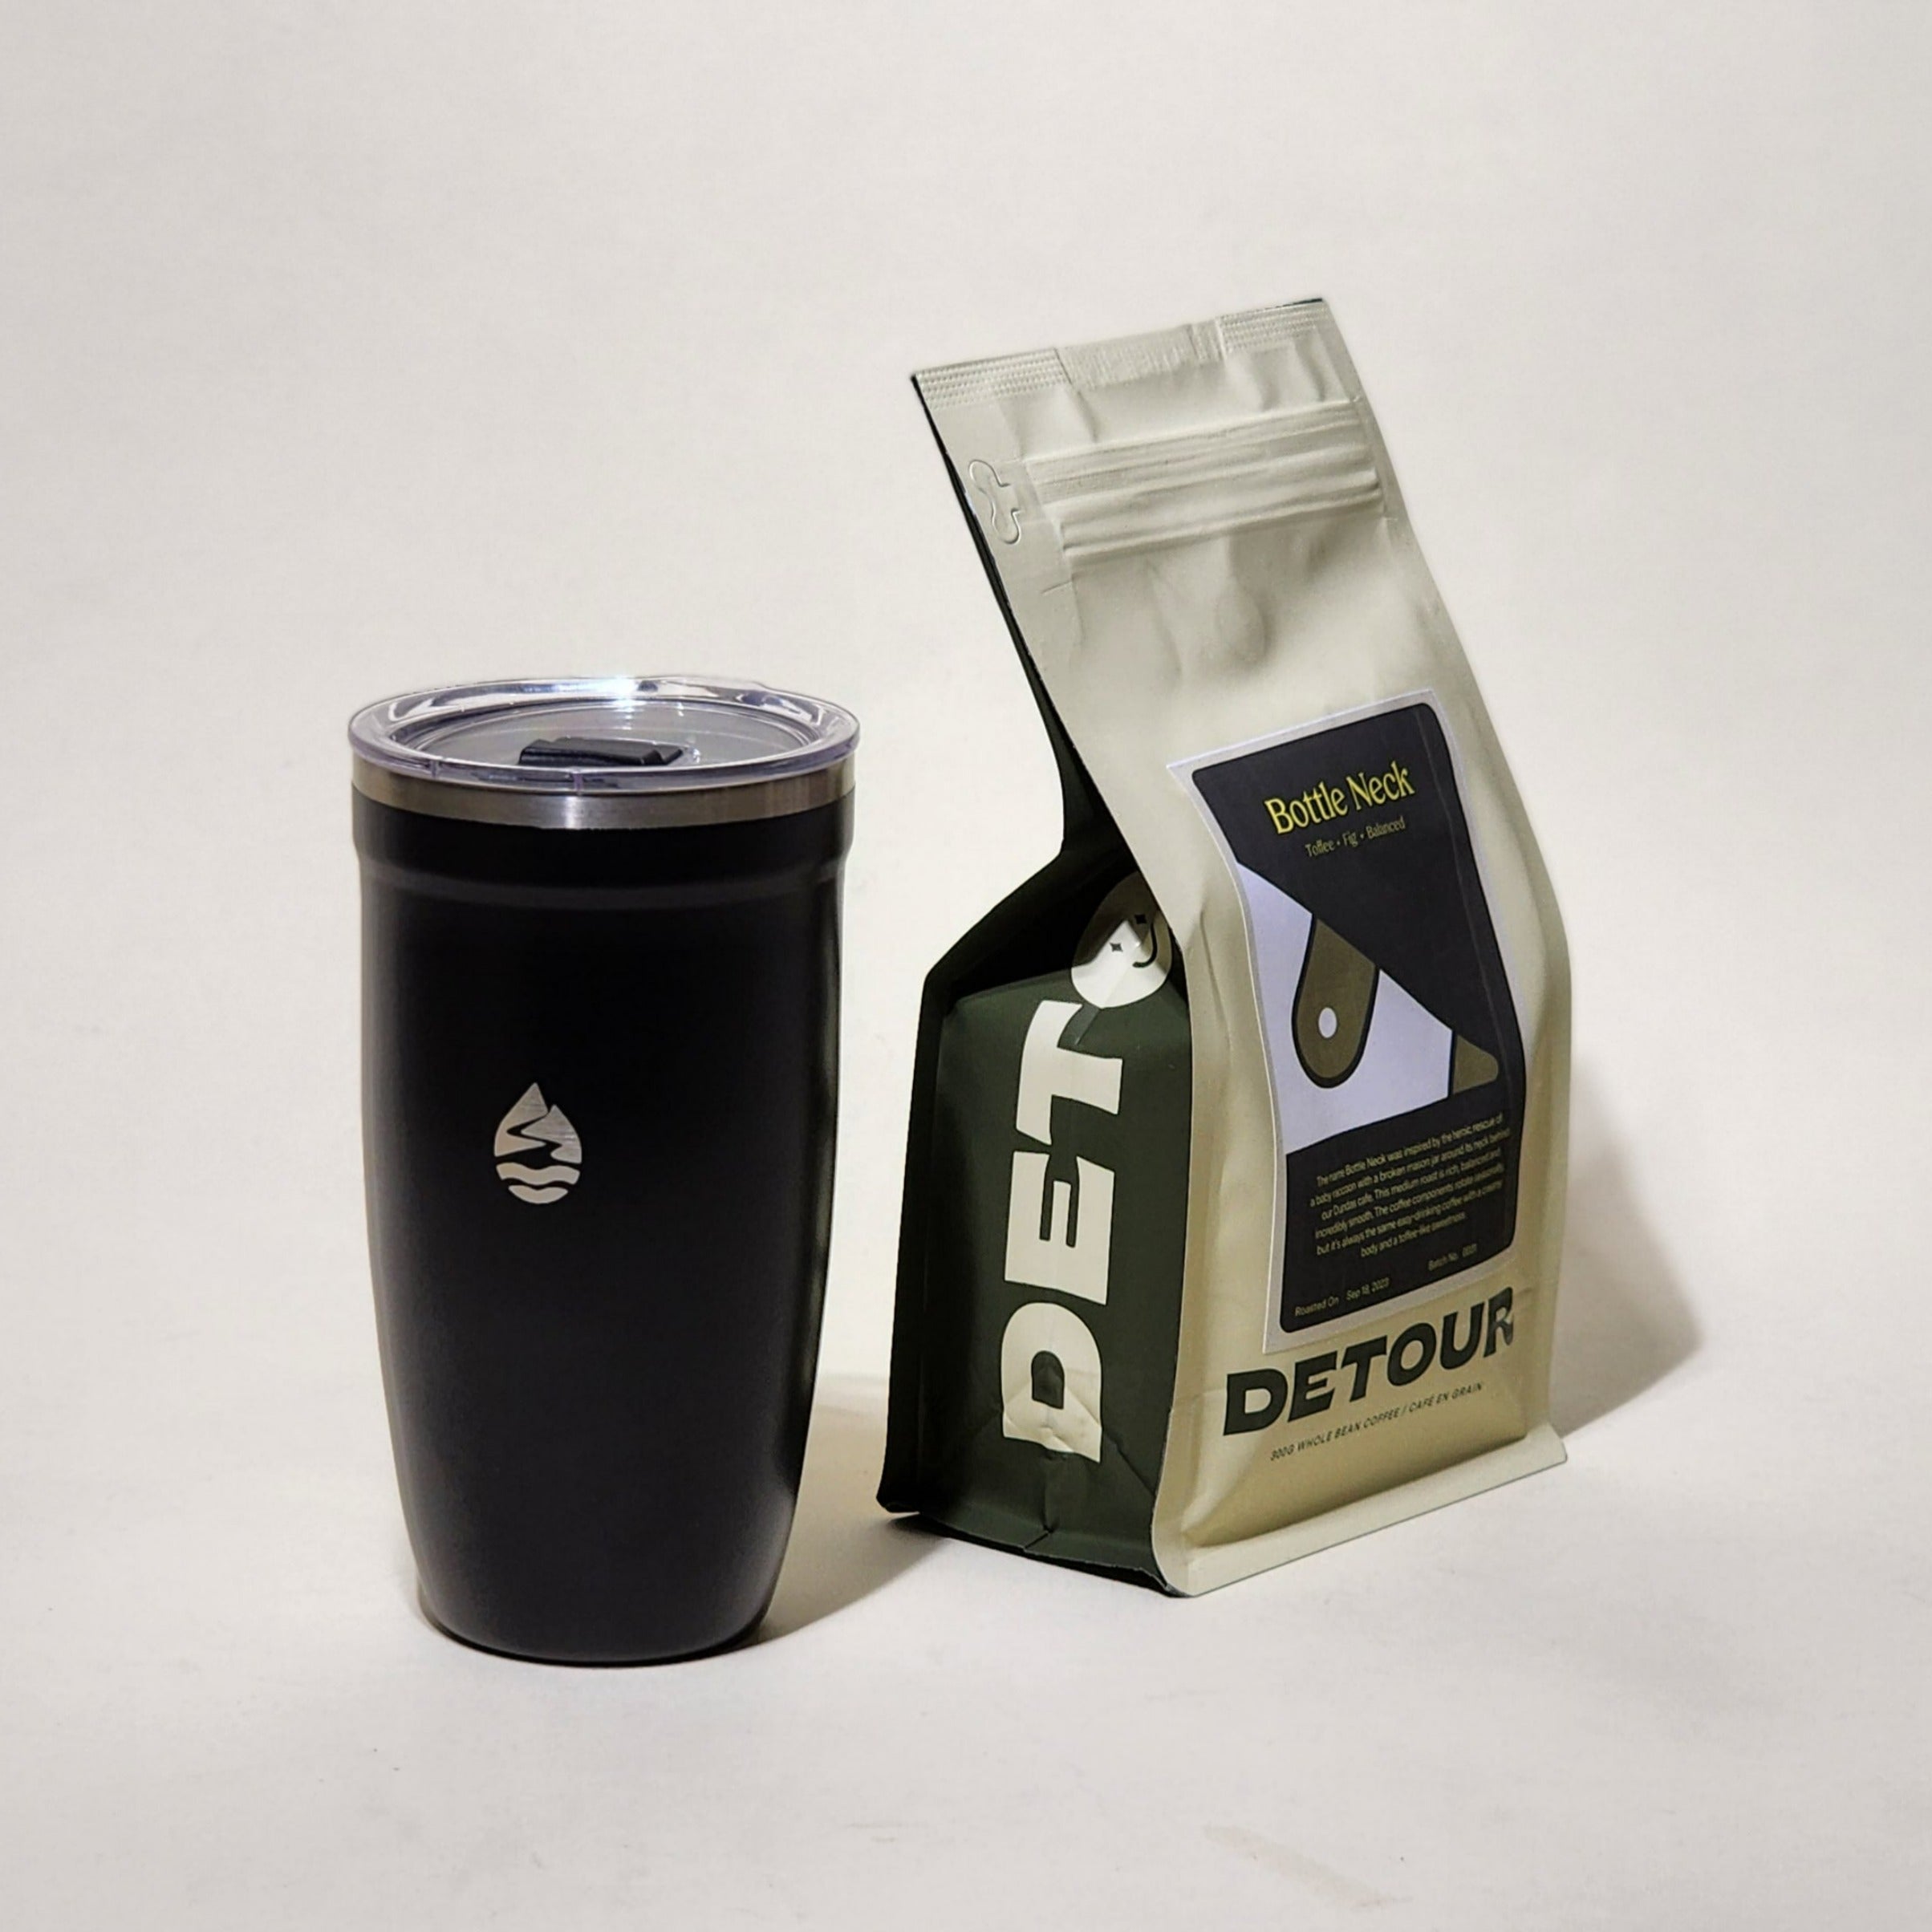 Detour Coffee Roaster Bottleneck Blend - Chocolate, Toffee, Fig Tasting Profile - Filter Balanced Coffee Style - Seasonal Celebration - Consistent Flavor Profile - Smooth Everyday Sipper - Creamy Texture - Approachable Complexity - Baby Raccoon Rescue Inspiration - Learn More on Our Website